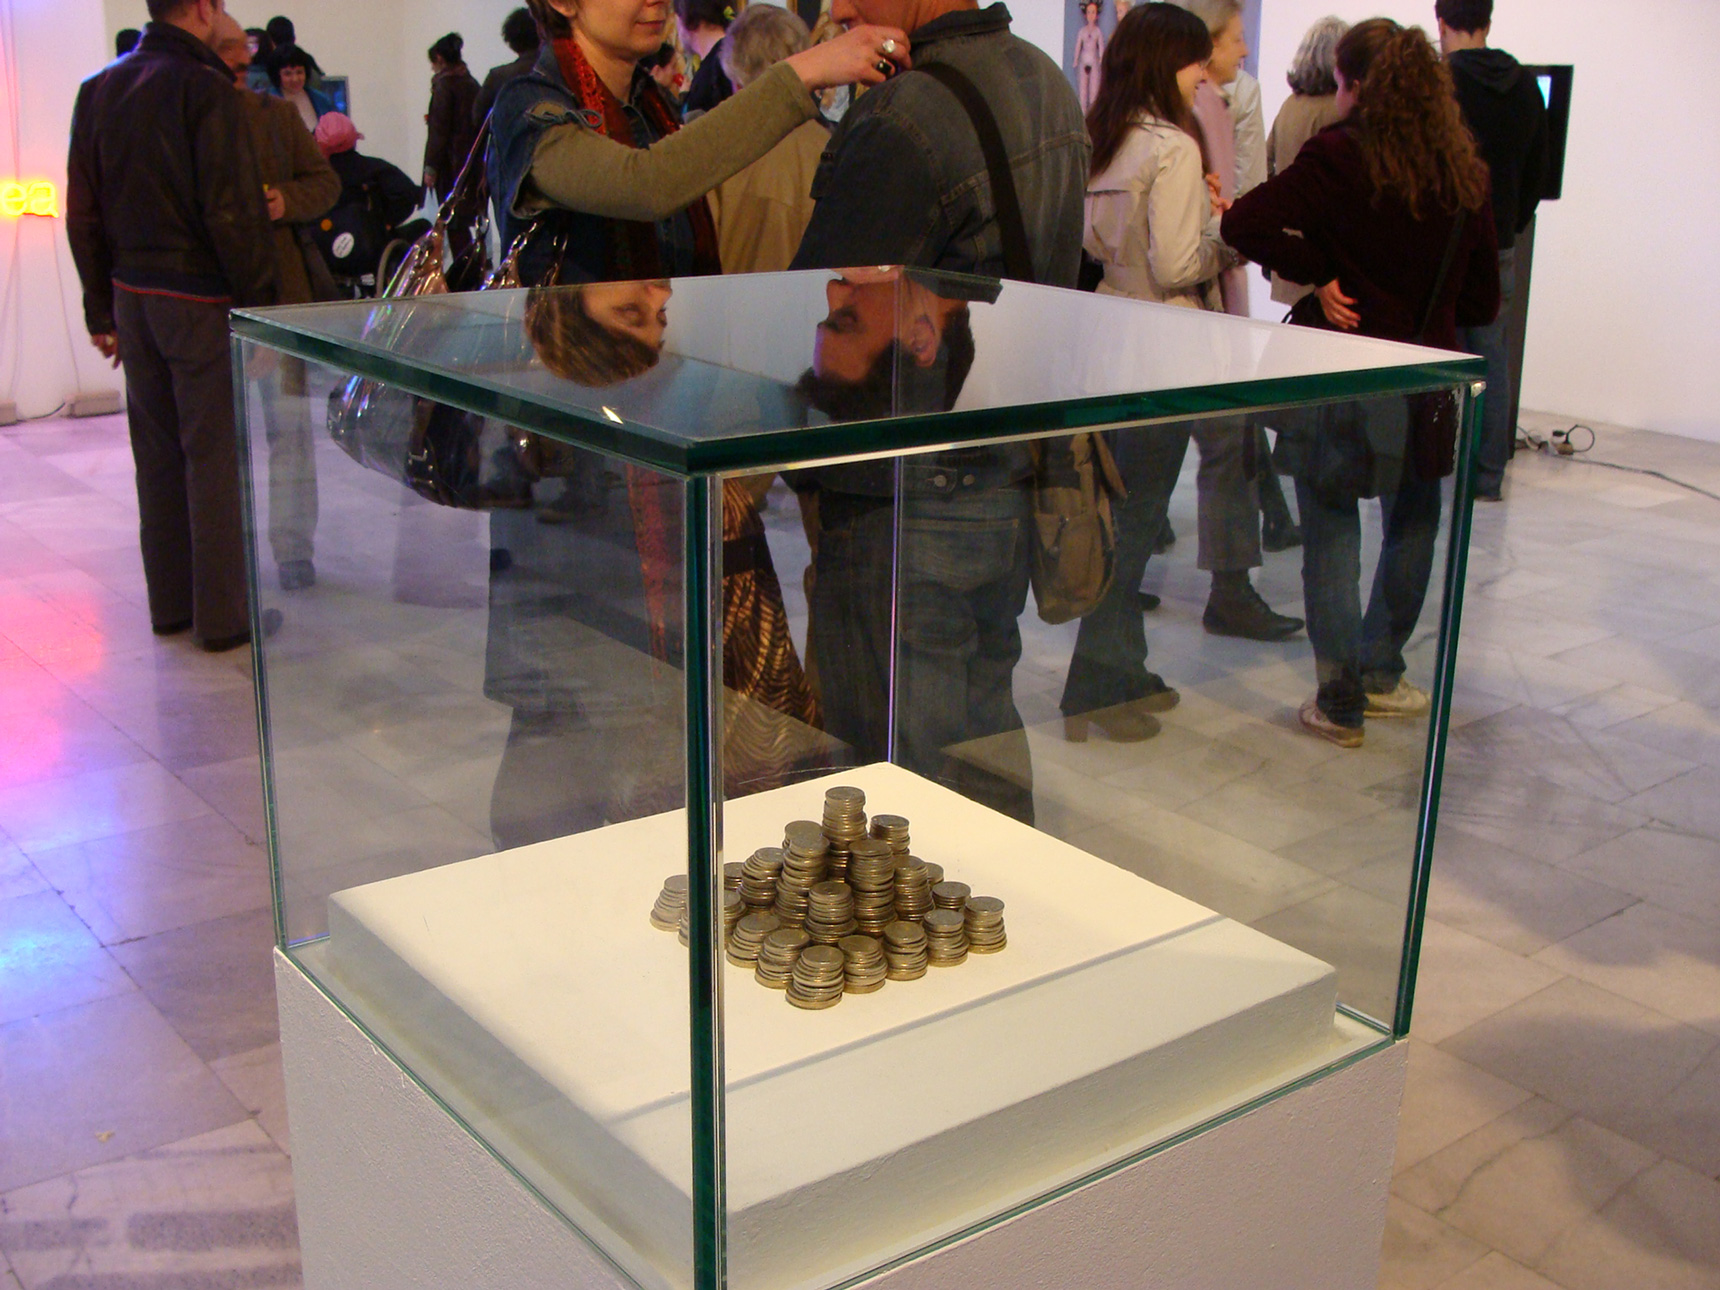 My budget for this exhibition, 2009